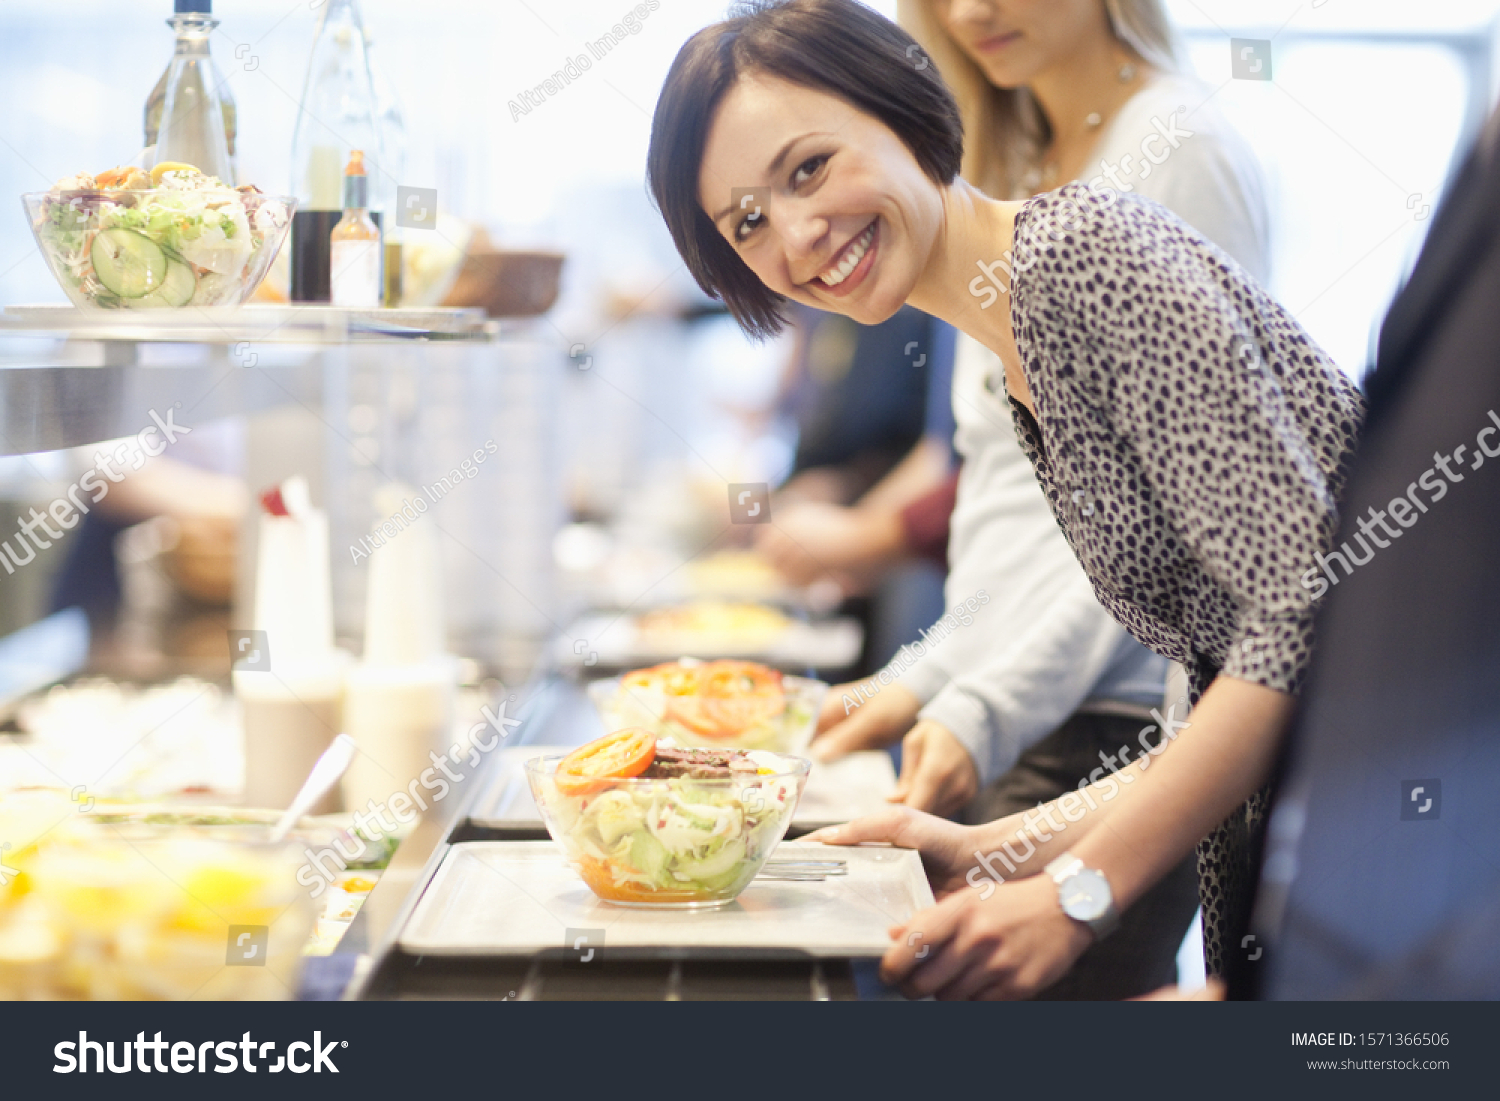 Portrait of businesswoman in lunch line at work cafeteria #1571366506